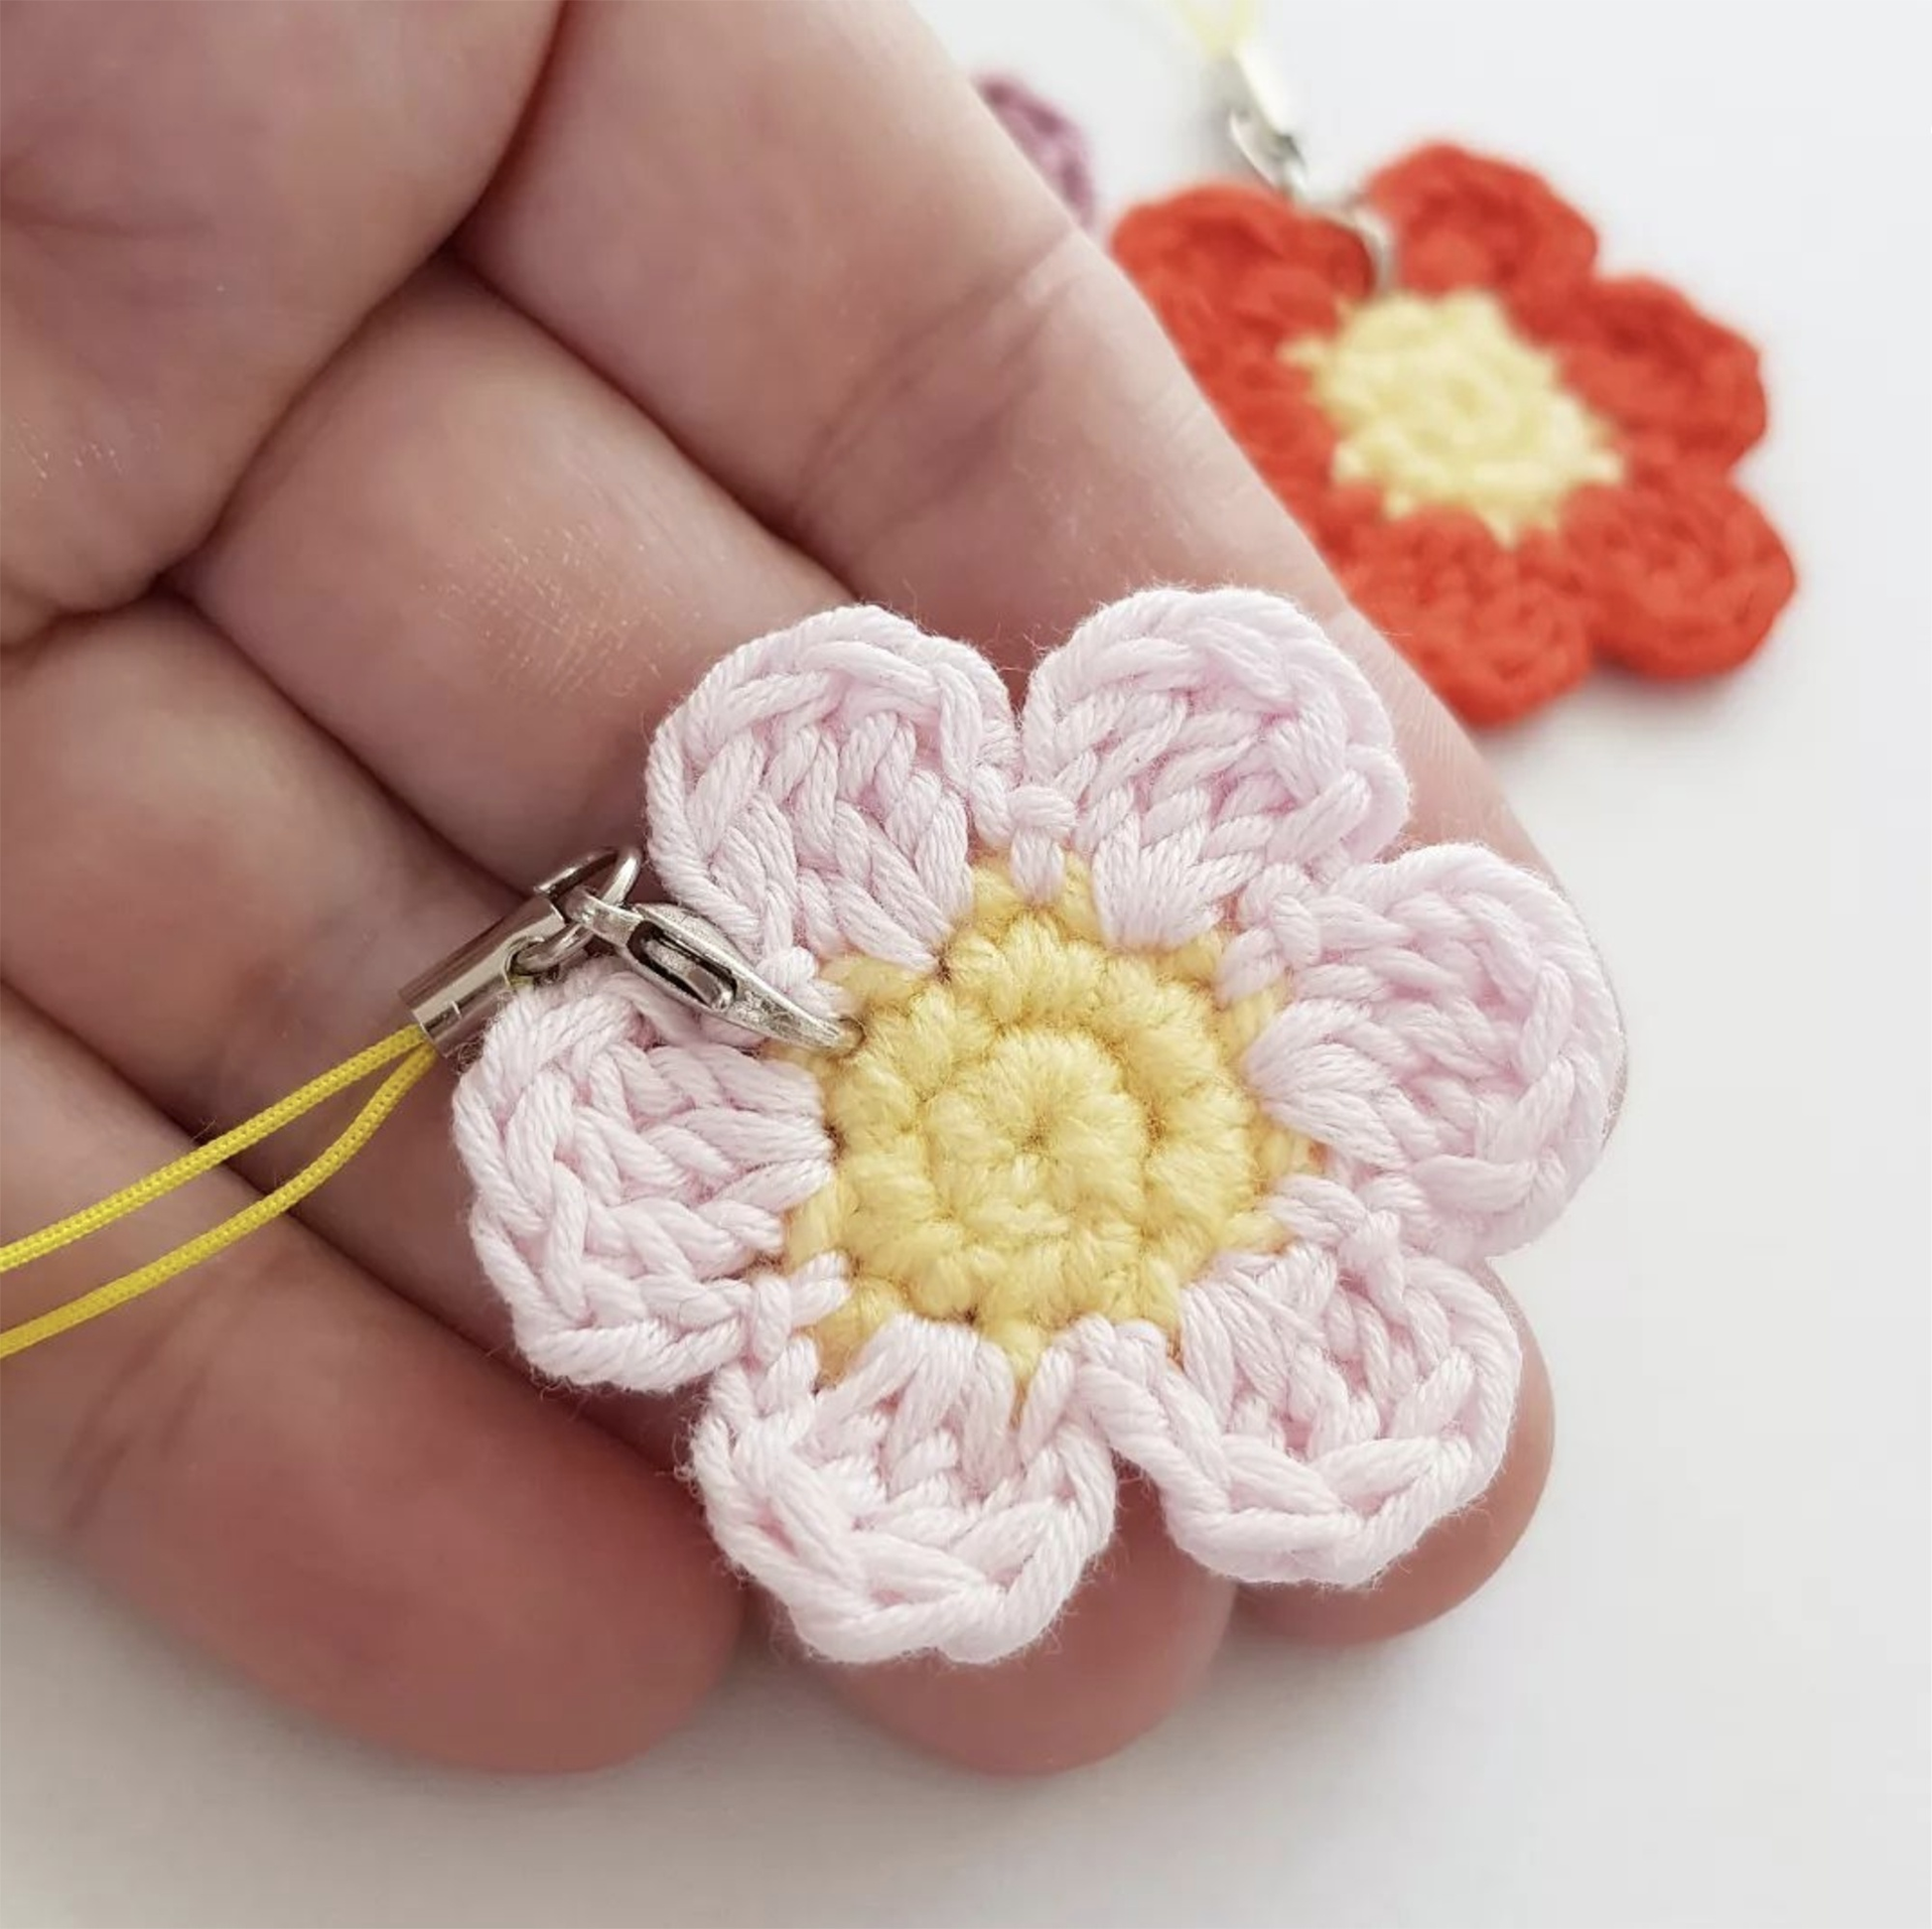 Colorful Crochet Creations: Unique Flower Keychains by CocoFlower